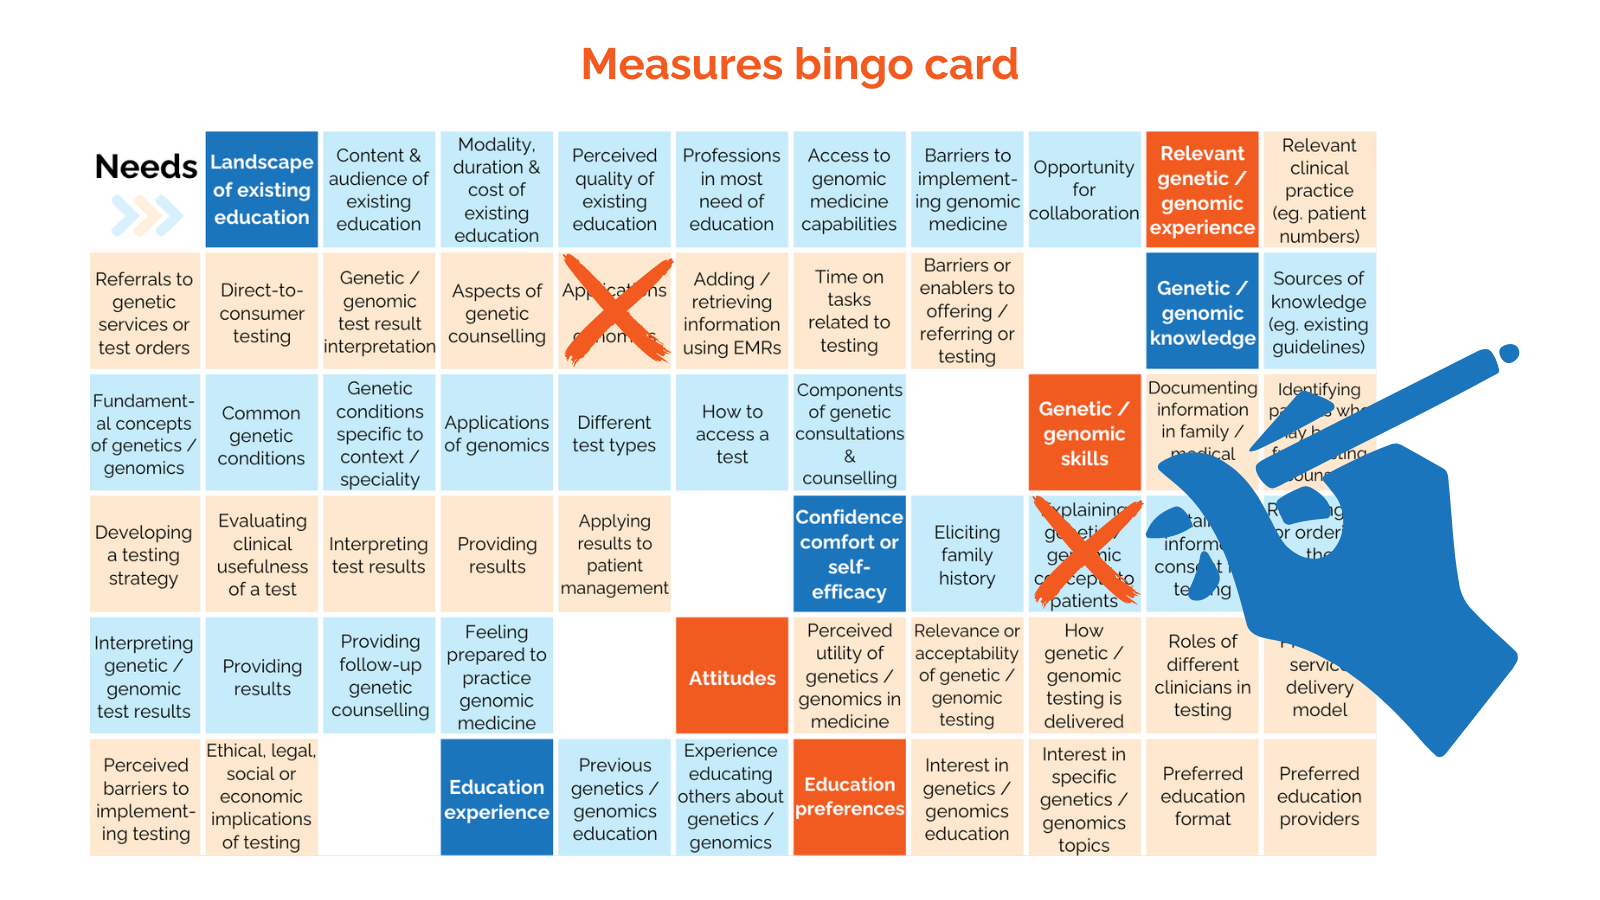 A screenshot of the 'measures bingo card' which is part of the evaluation tool.